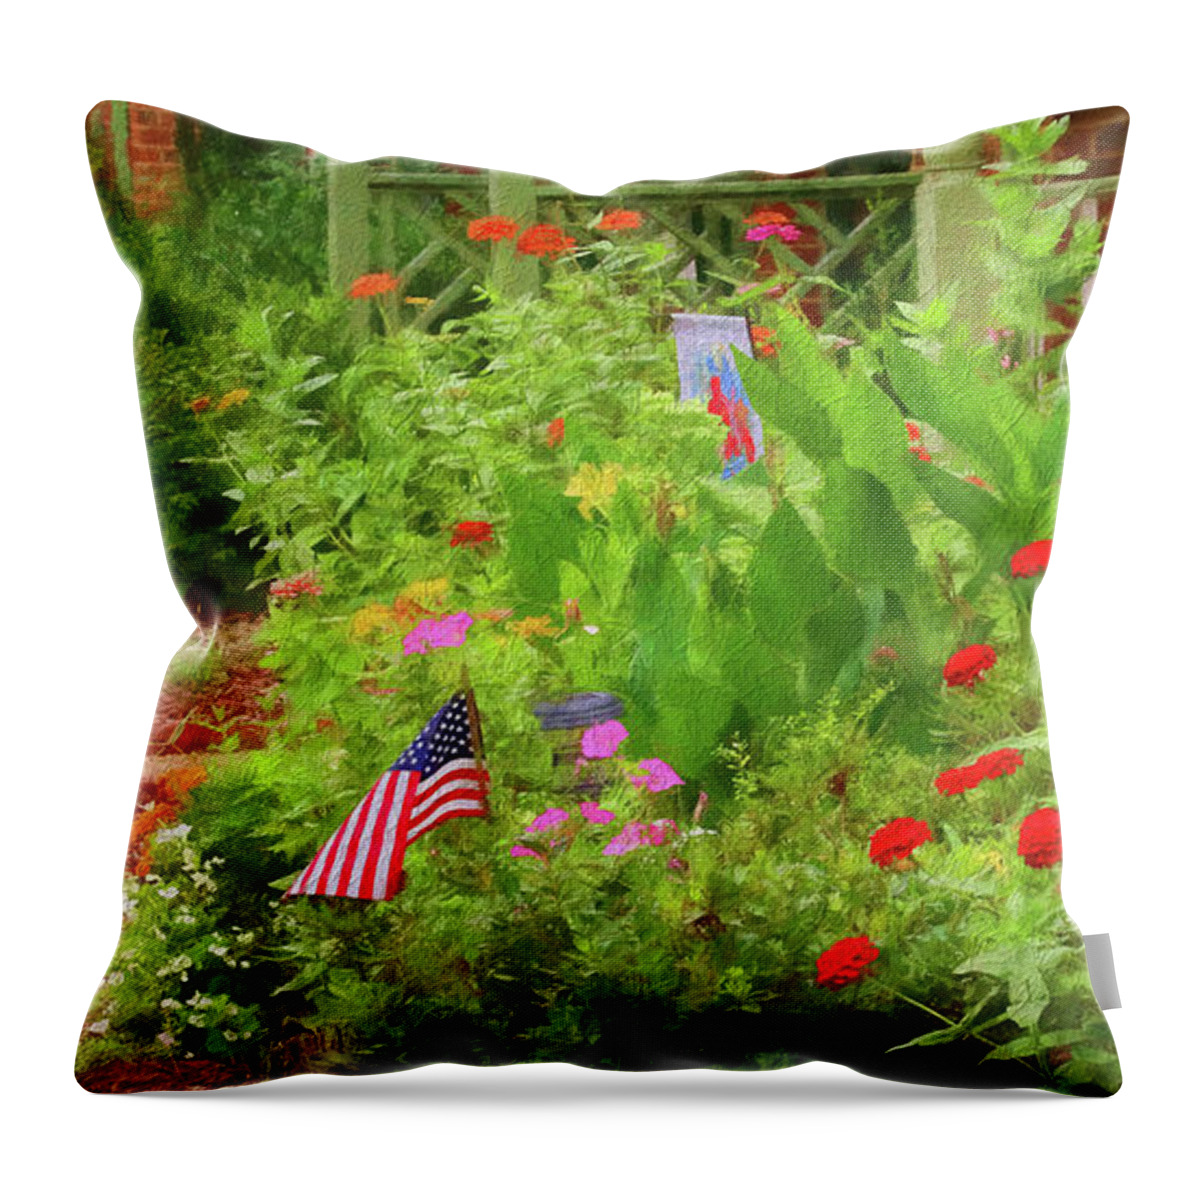 Flowers Throw Pillow featuring the photograph Summertime in the Flower Garden by Ola Allen